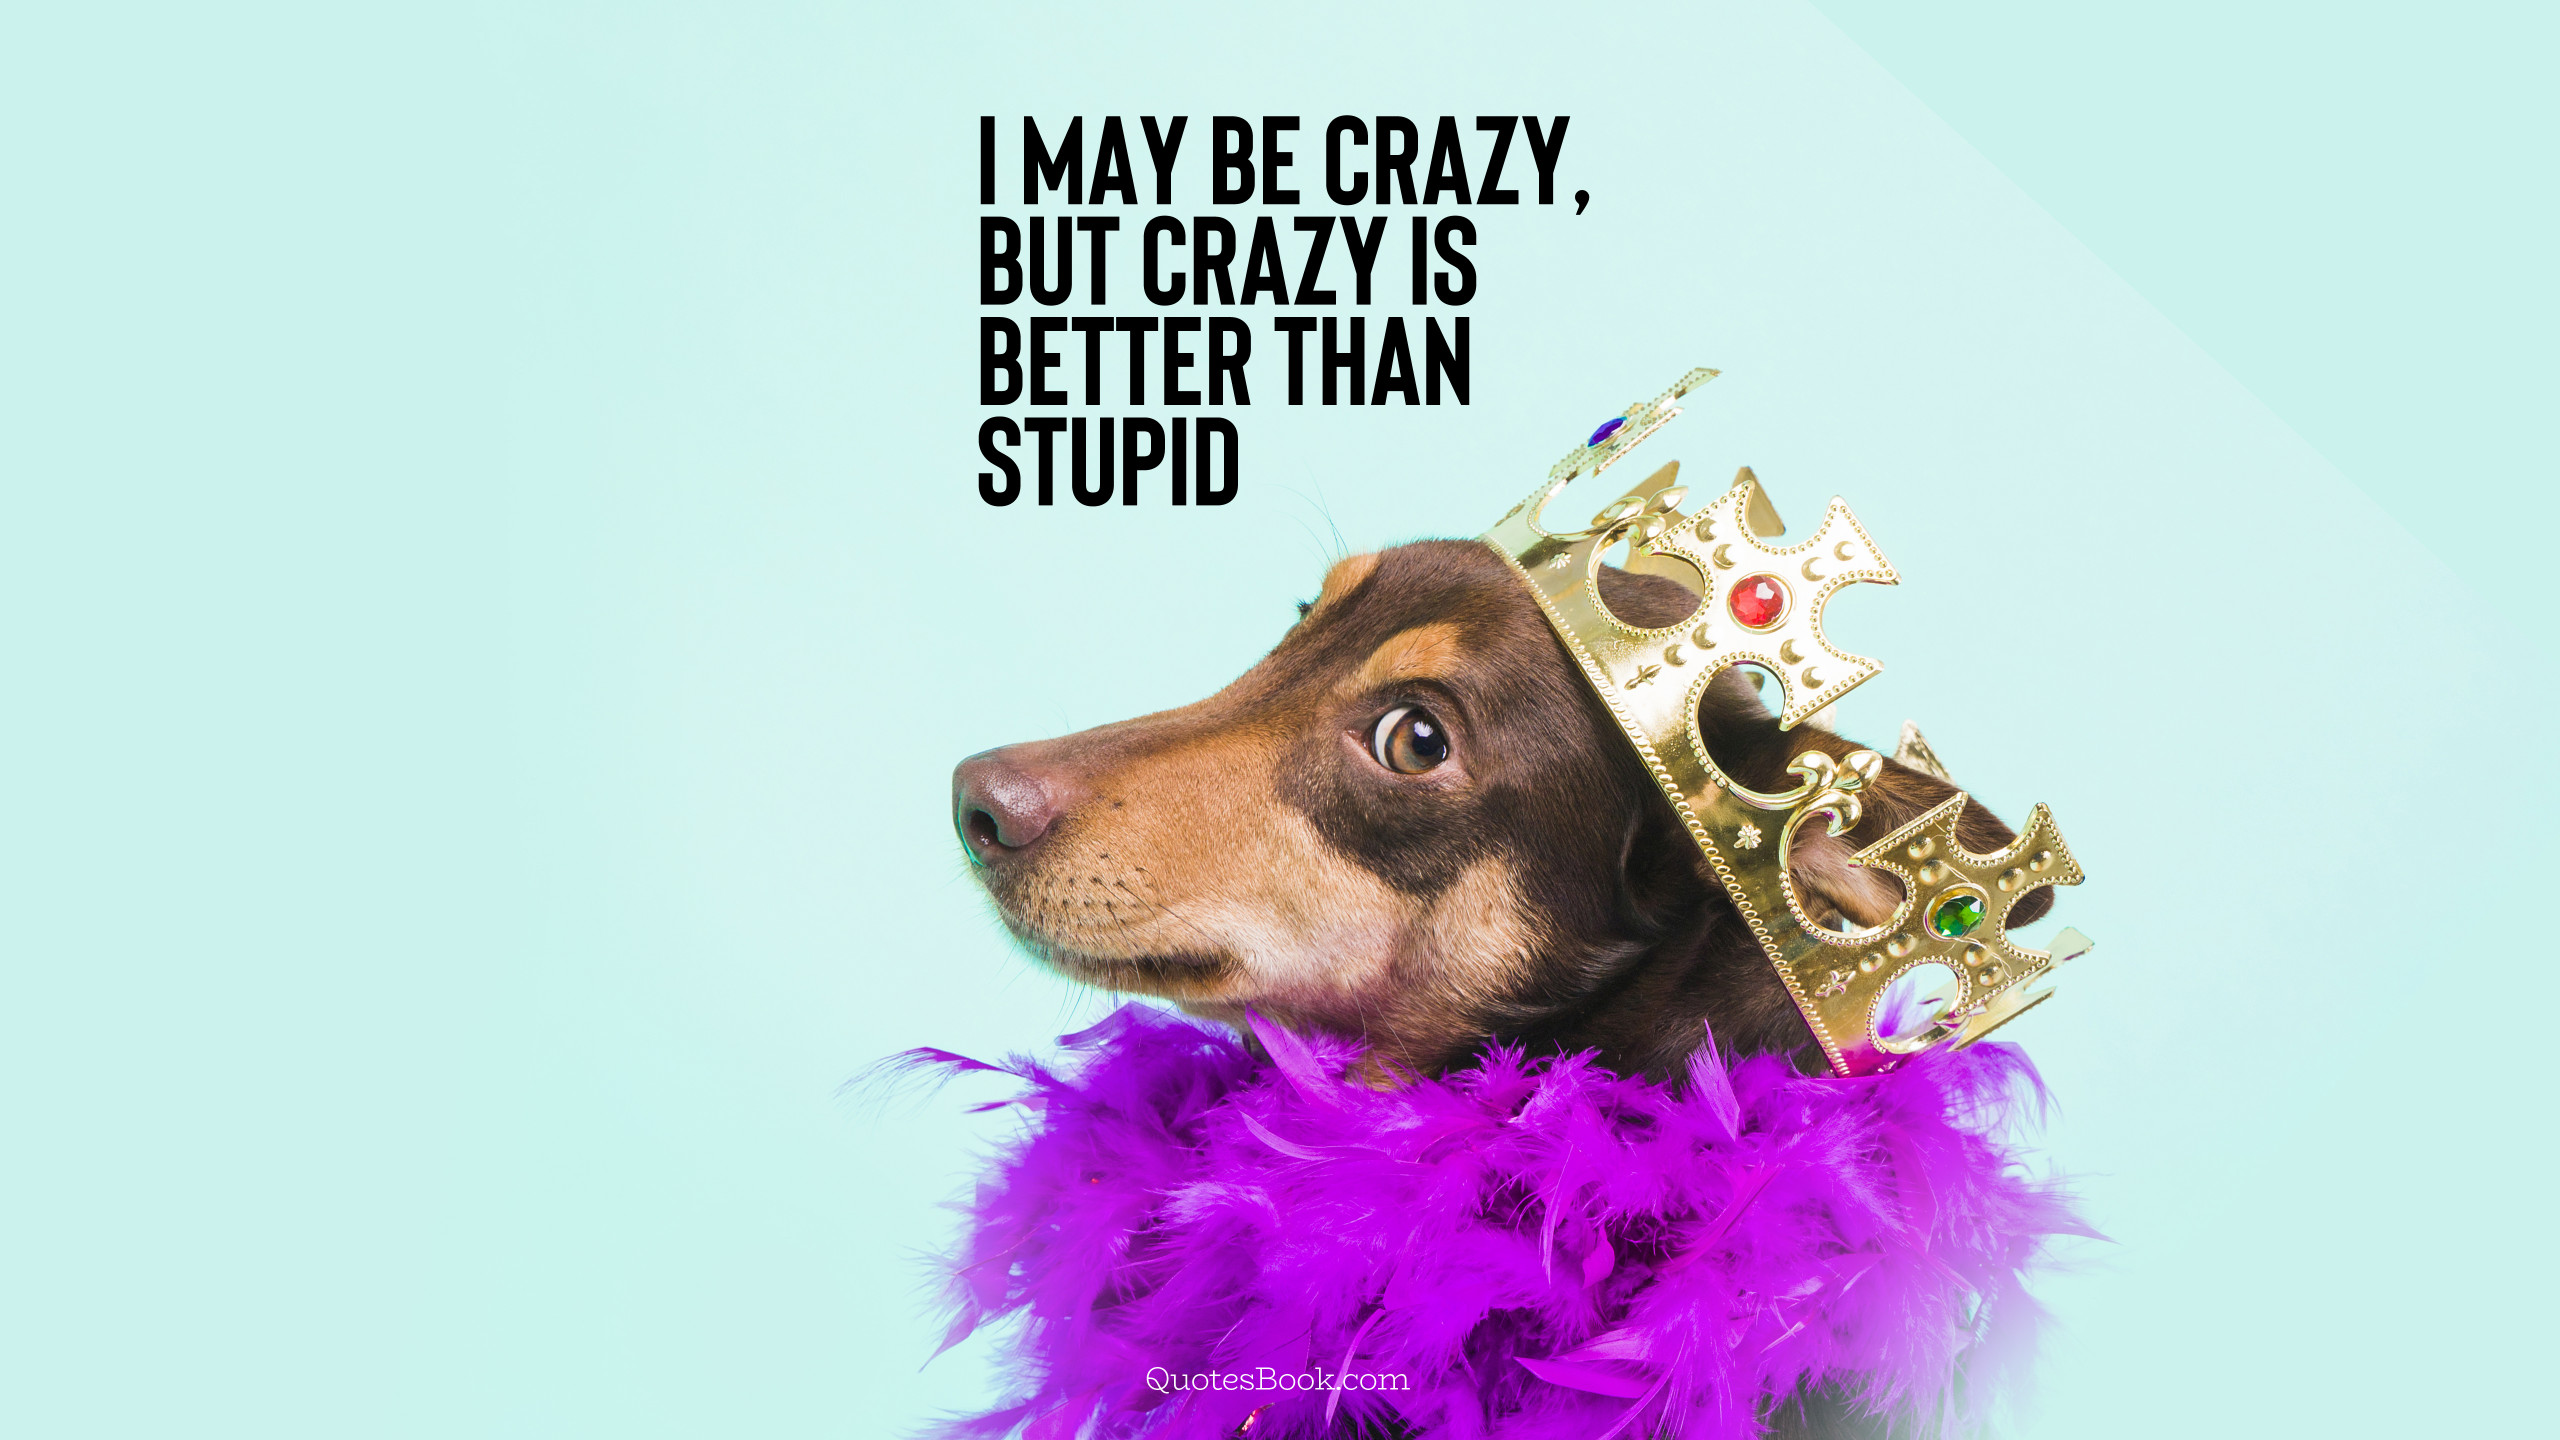 i may be crazy but crazy is better than stupid 2560x1440 4340